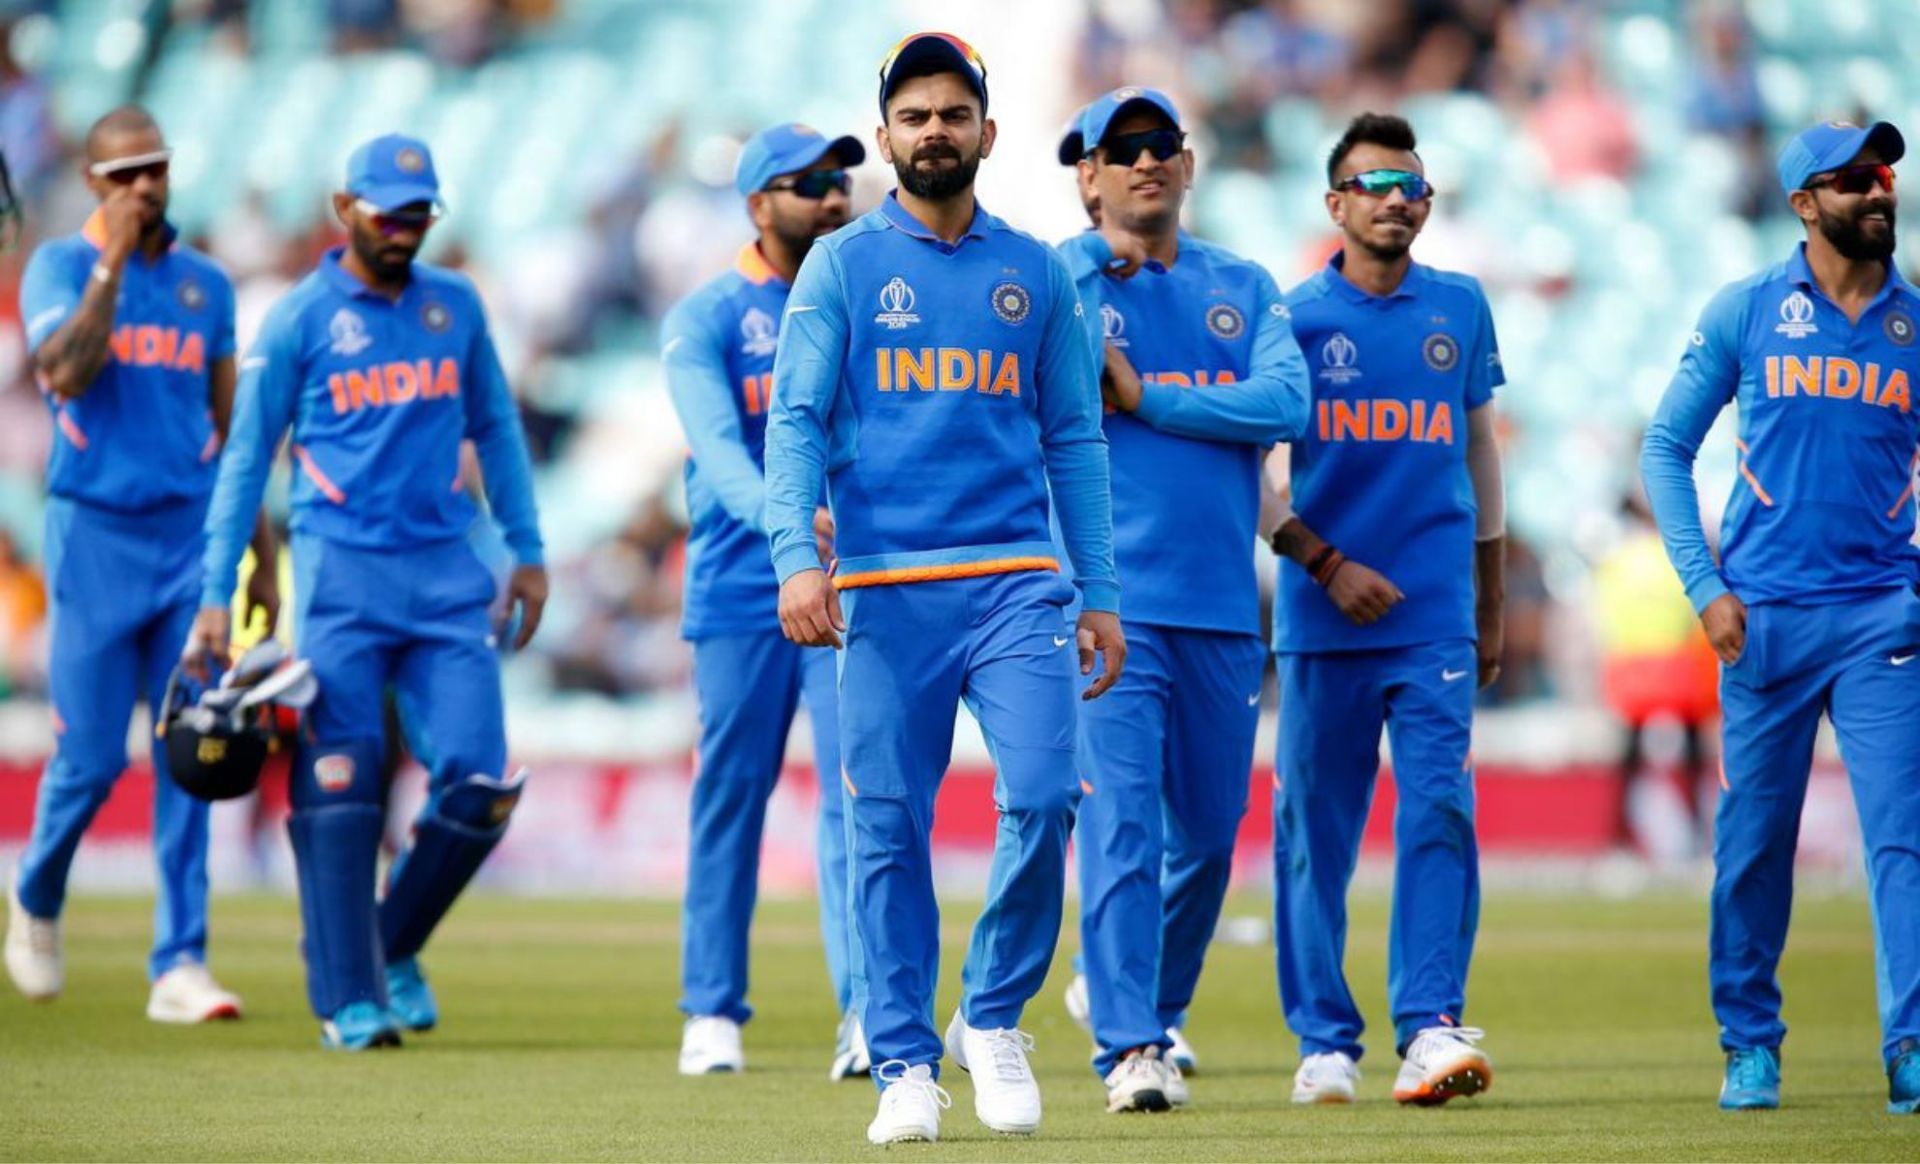 Indian cricket team at the 2019 World Cup.